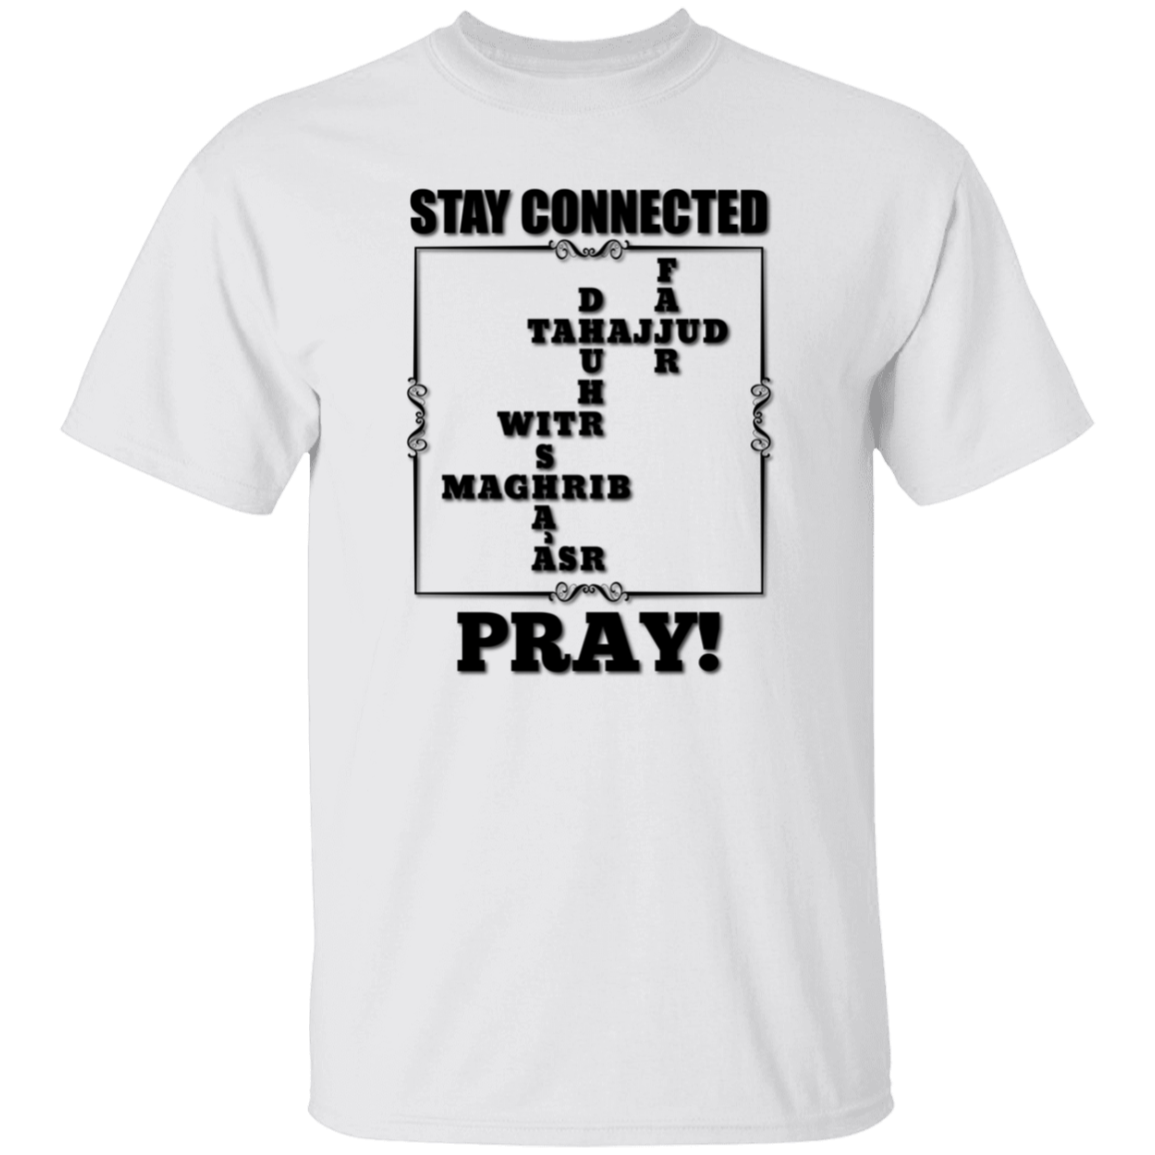 STAY CONNECTED, PRAY  T-Shirt (MORE COLOR OPTIONS)